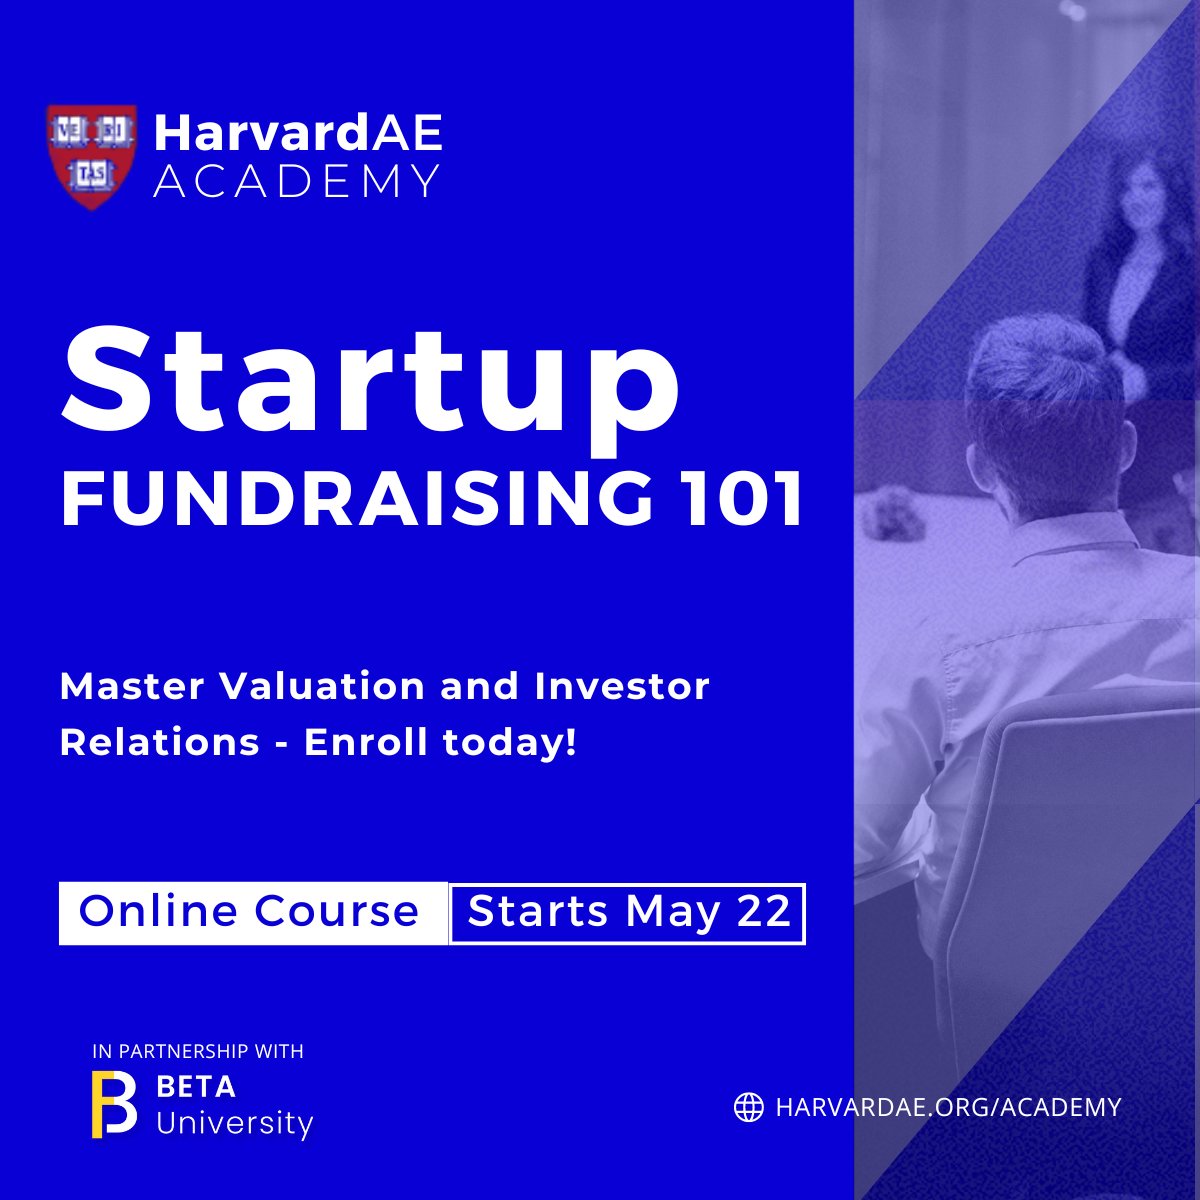 Unlock Success: Master Valuation & Forge Winning Investor Relations!

Week 2 Highlight: Crafting a Winning Strategy

Enroll Now and Propel Your Fundraising Journey!
harvardae.org/academy-course…

#Harvard #HAE #StartupFunding #SeedInvesting #VentureCapital #AngelInvestors